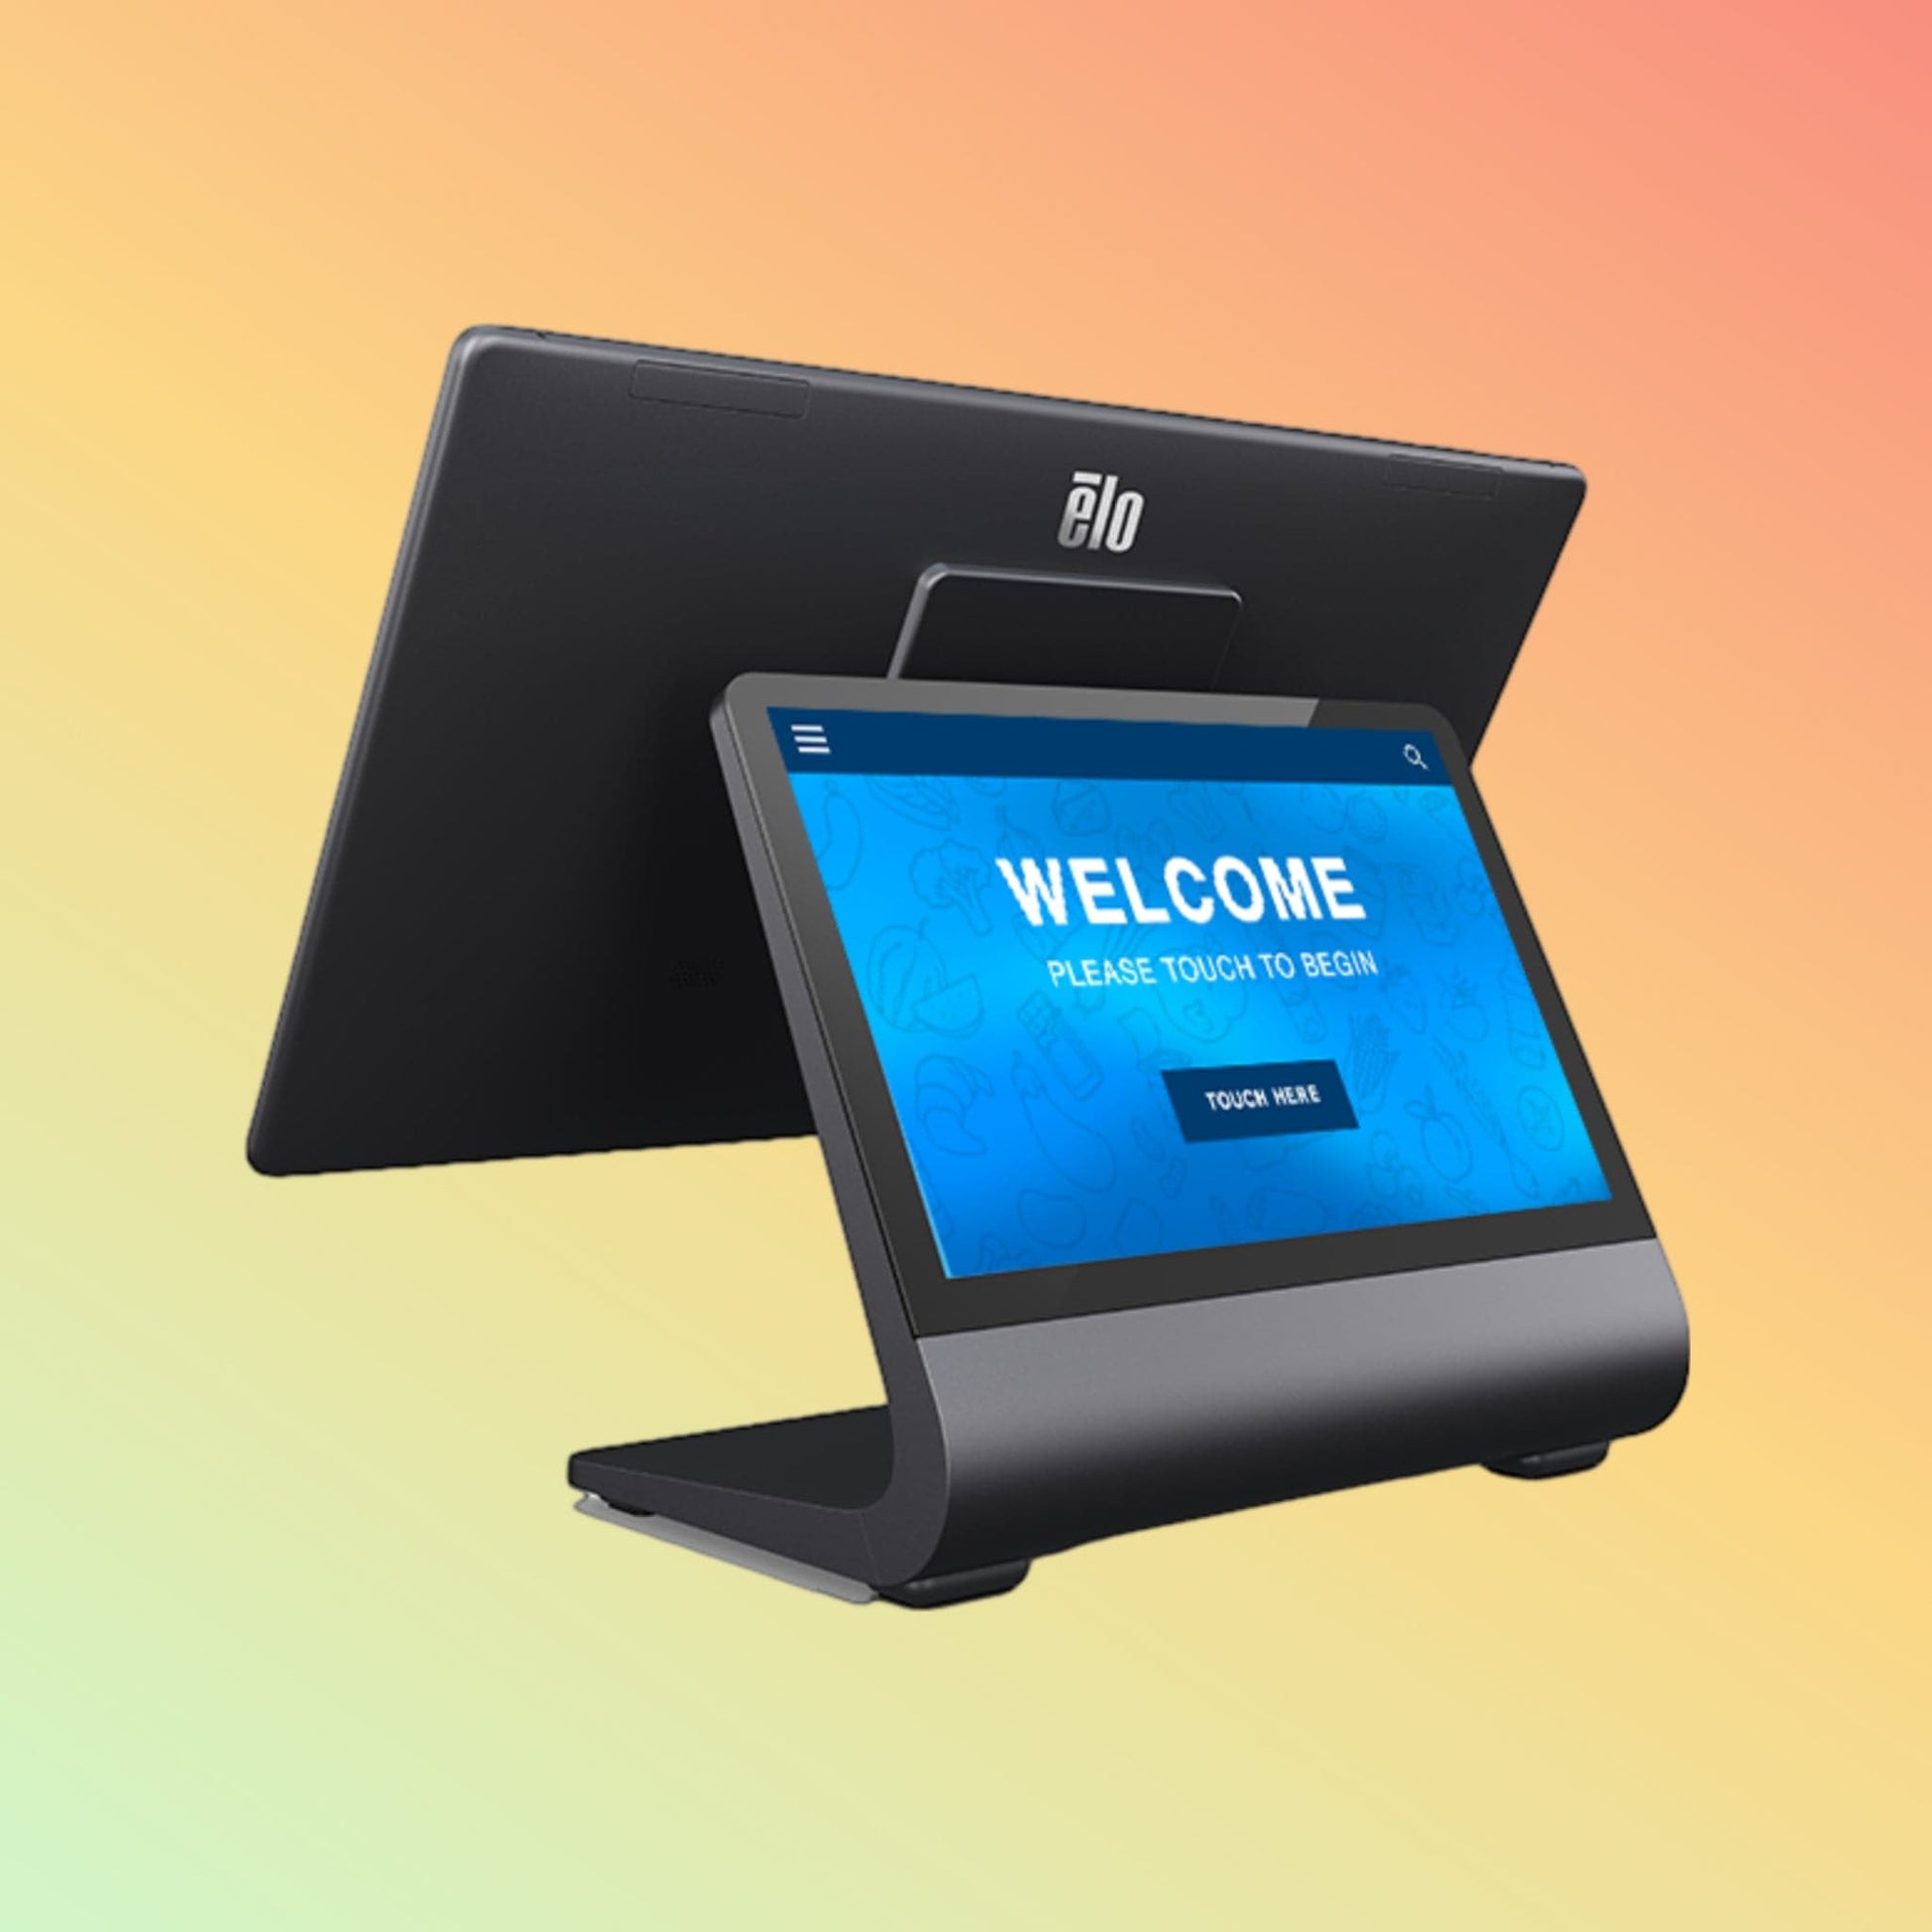 EloPOS Z30 Android POS: Sleek, Powerful & User-Friendly - Neotech